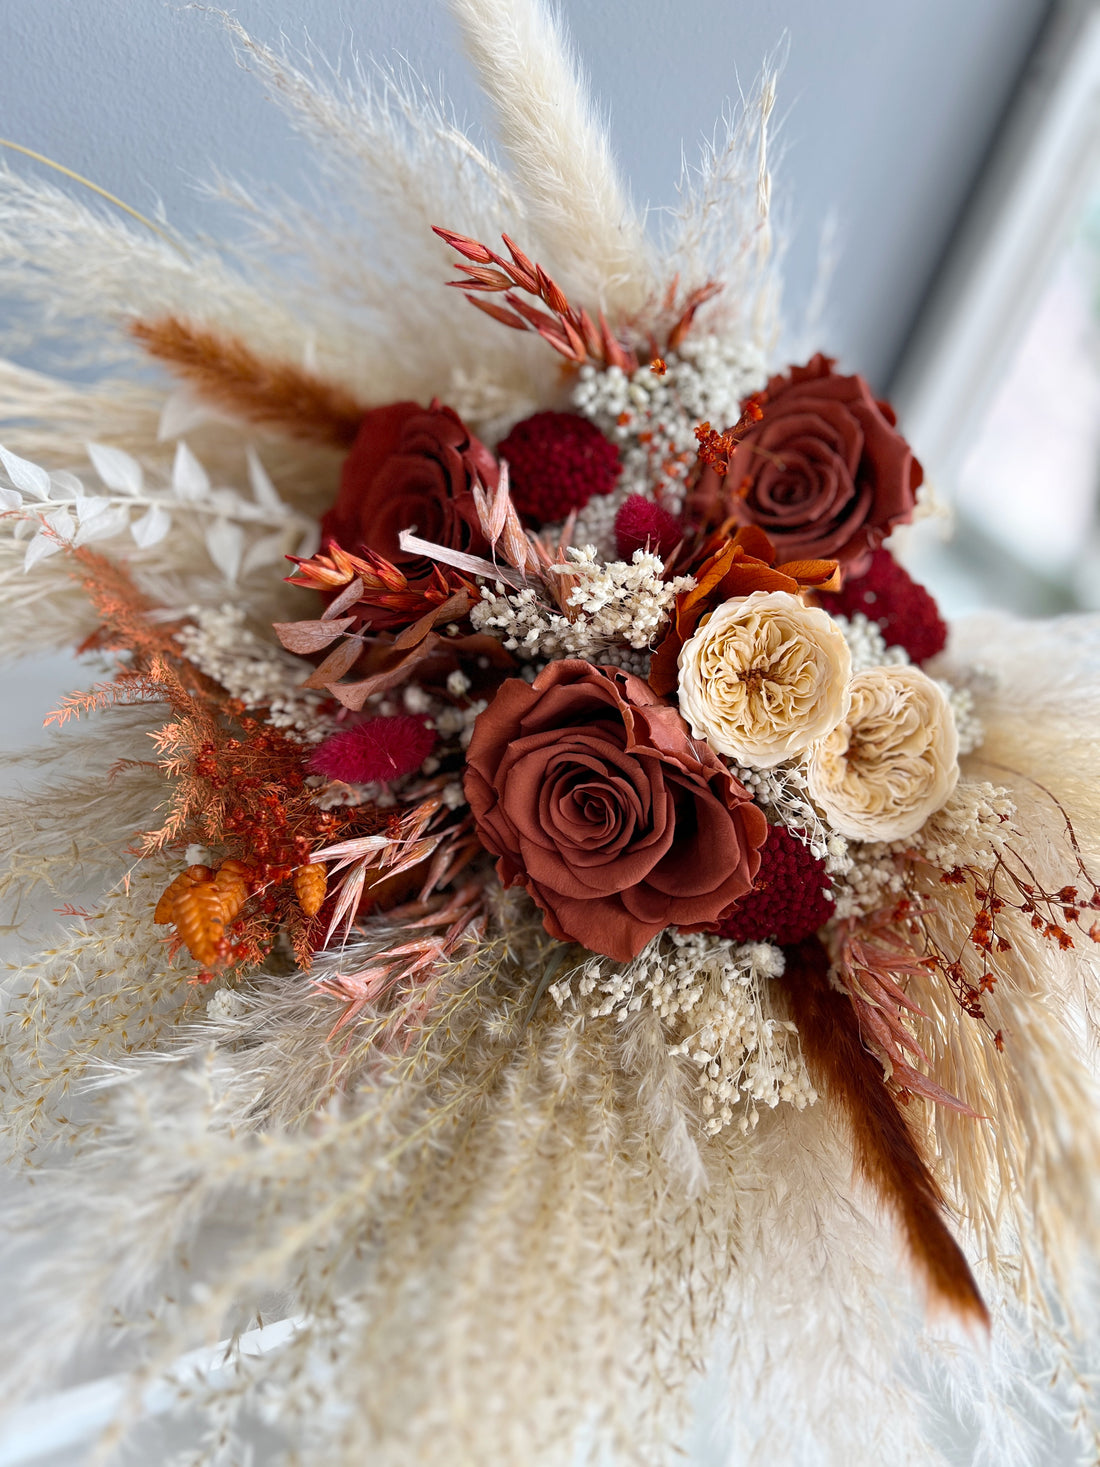 Timeless Beauty: 10 reasons to choose dried flowers for your wedding.